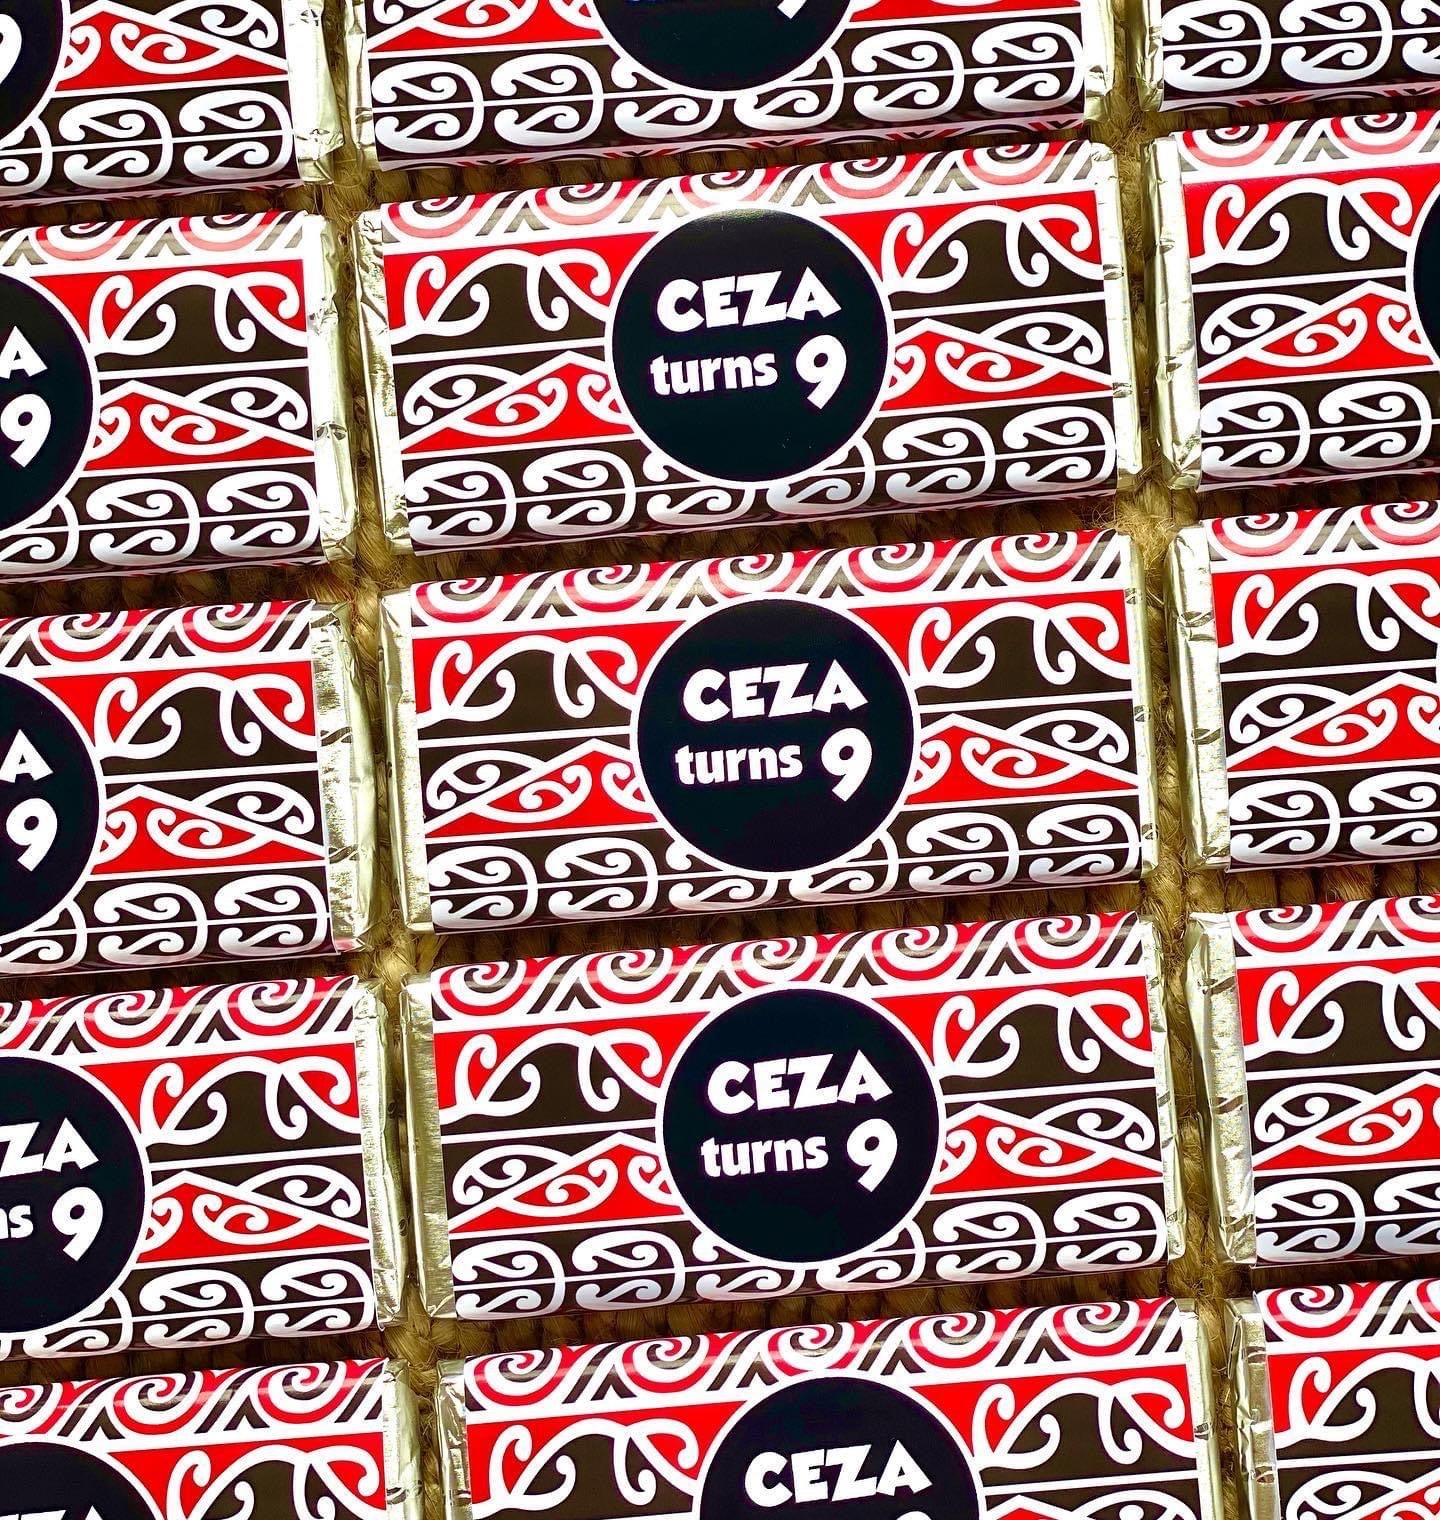 Samoan Tribal Print Personalised Chocolate Bar Party Favour x 4